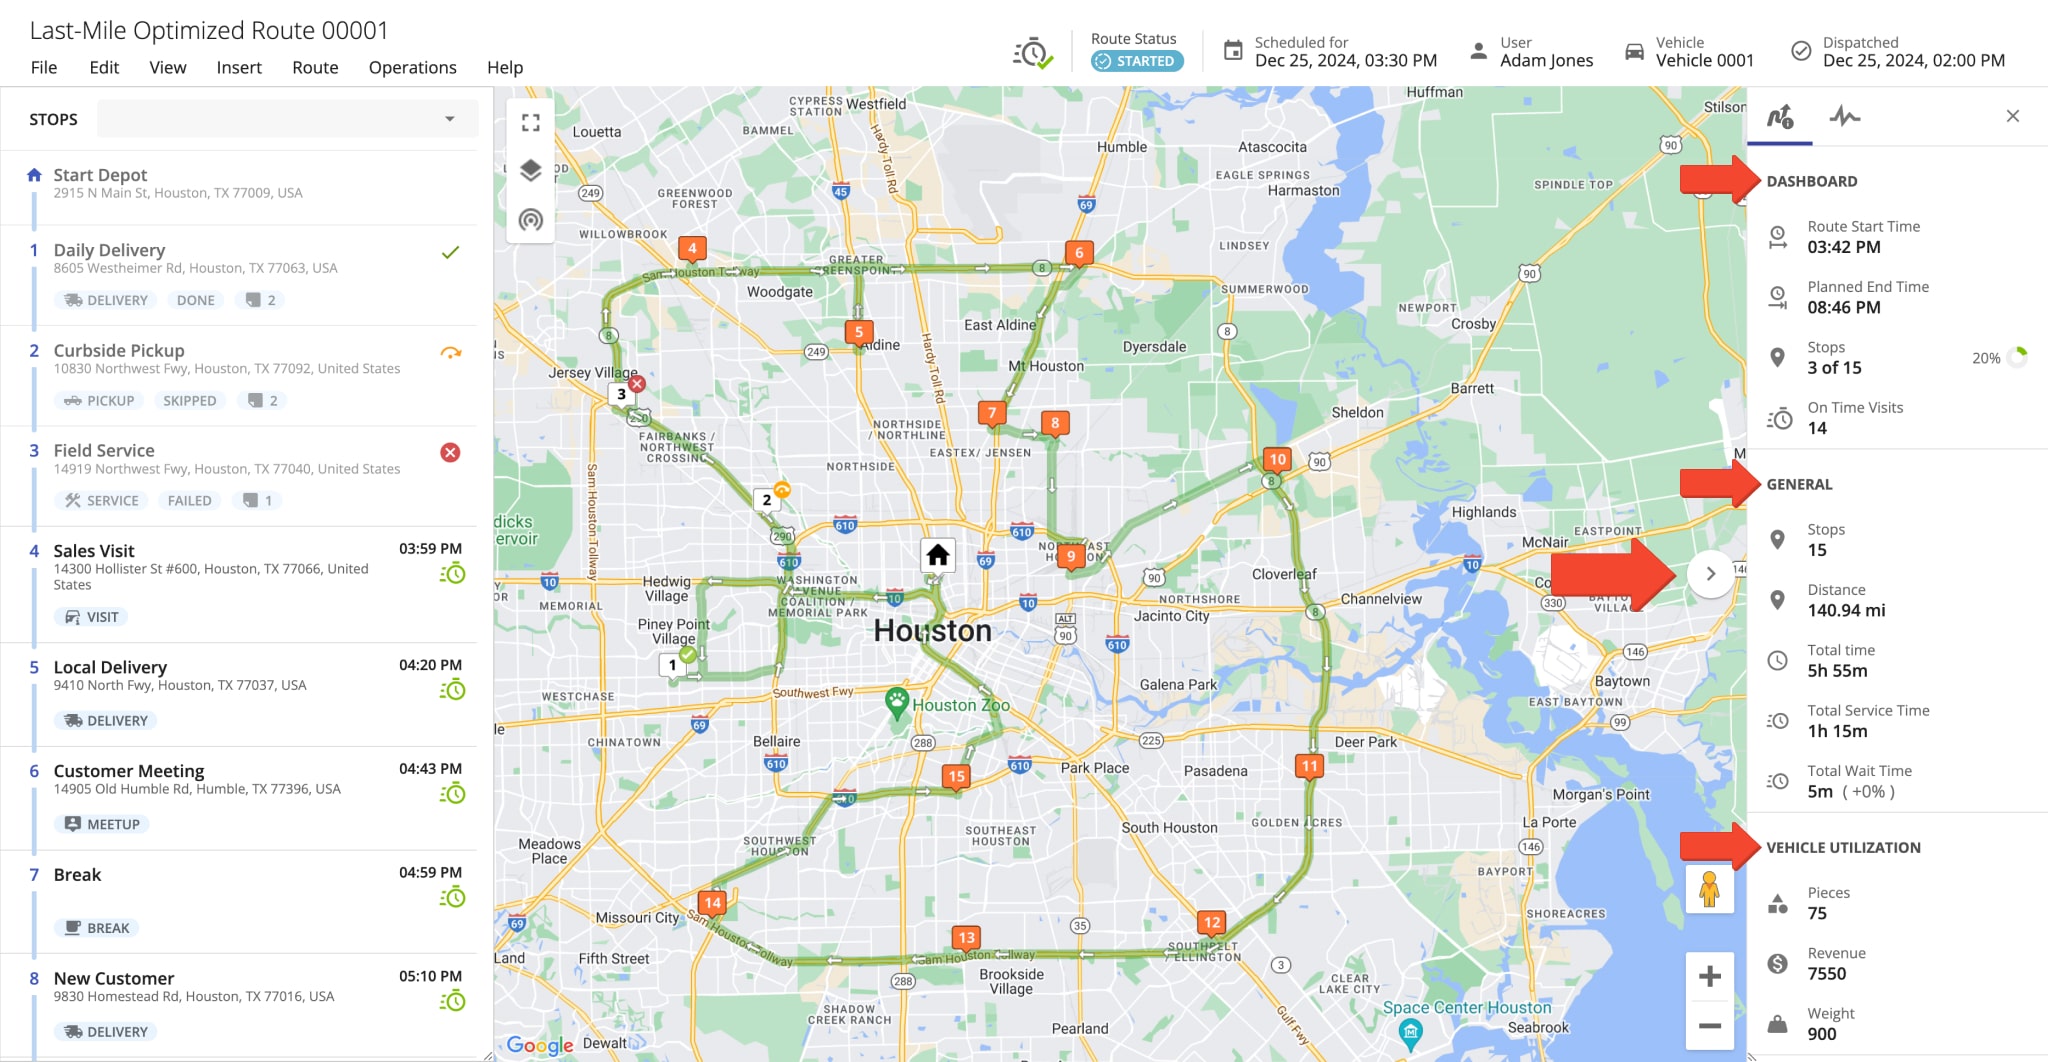 Route Editor Dashboard shows the route's totals, visited and failed stops, route distance and travel time, predicted finish time, vehicle utilization, and more.